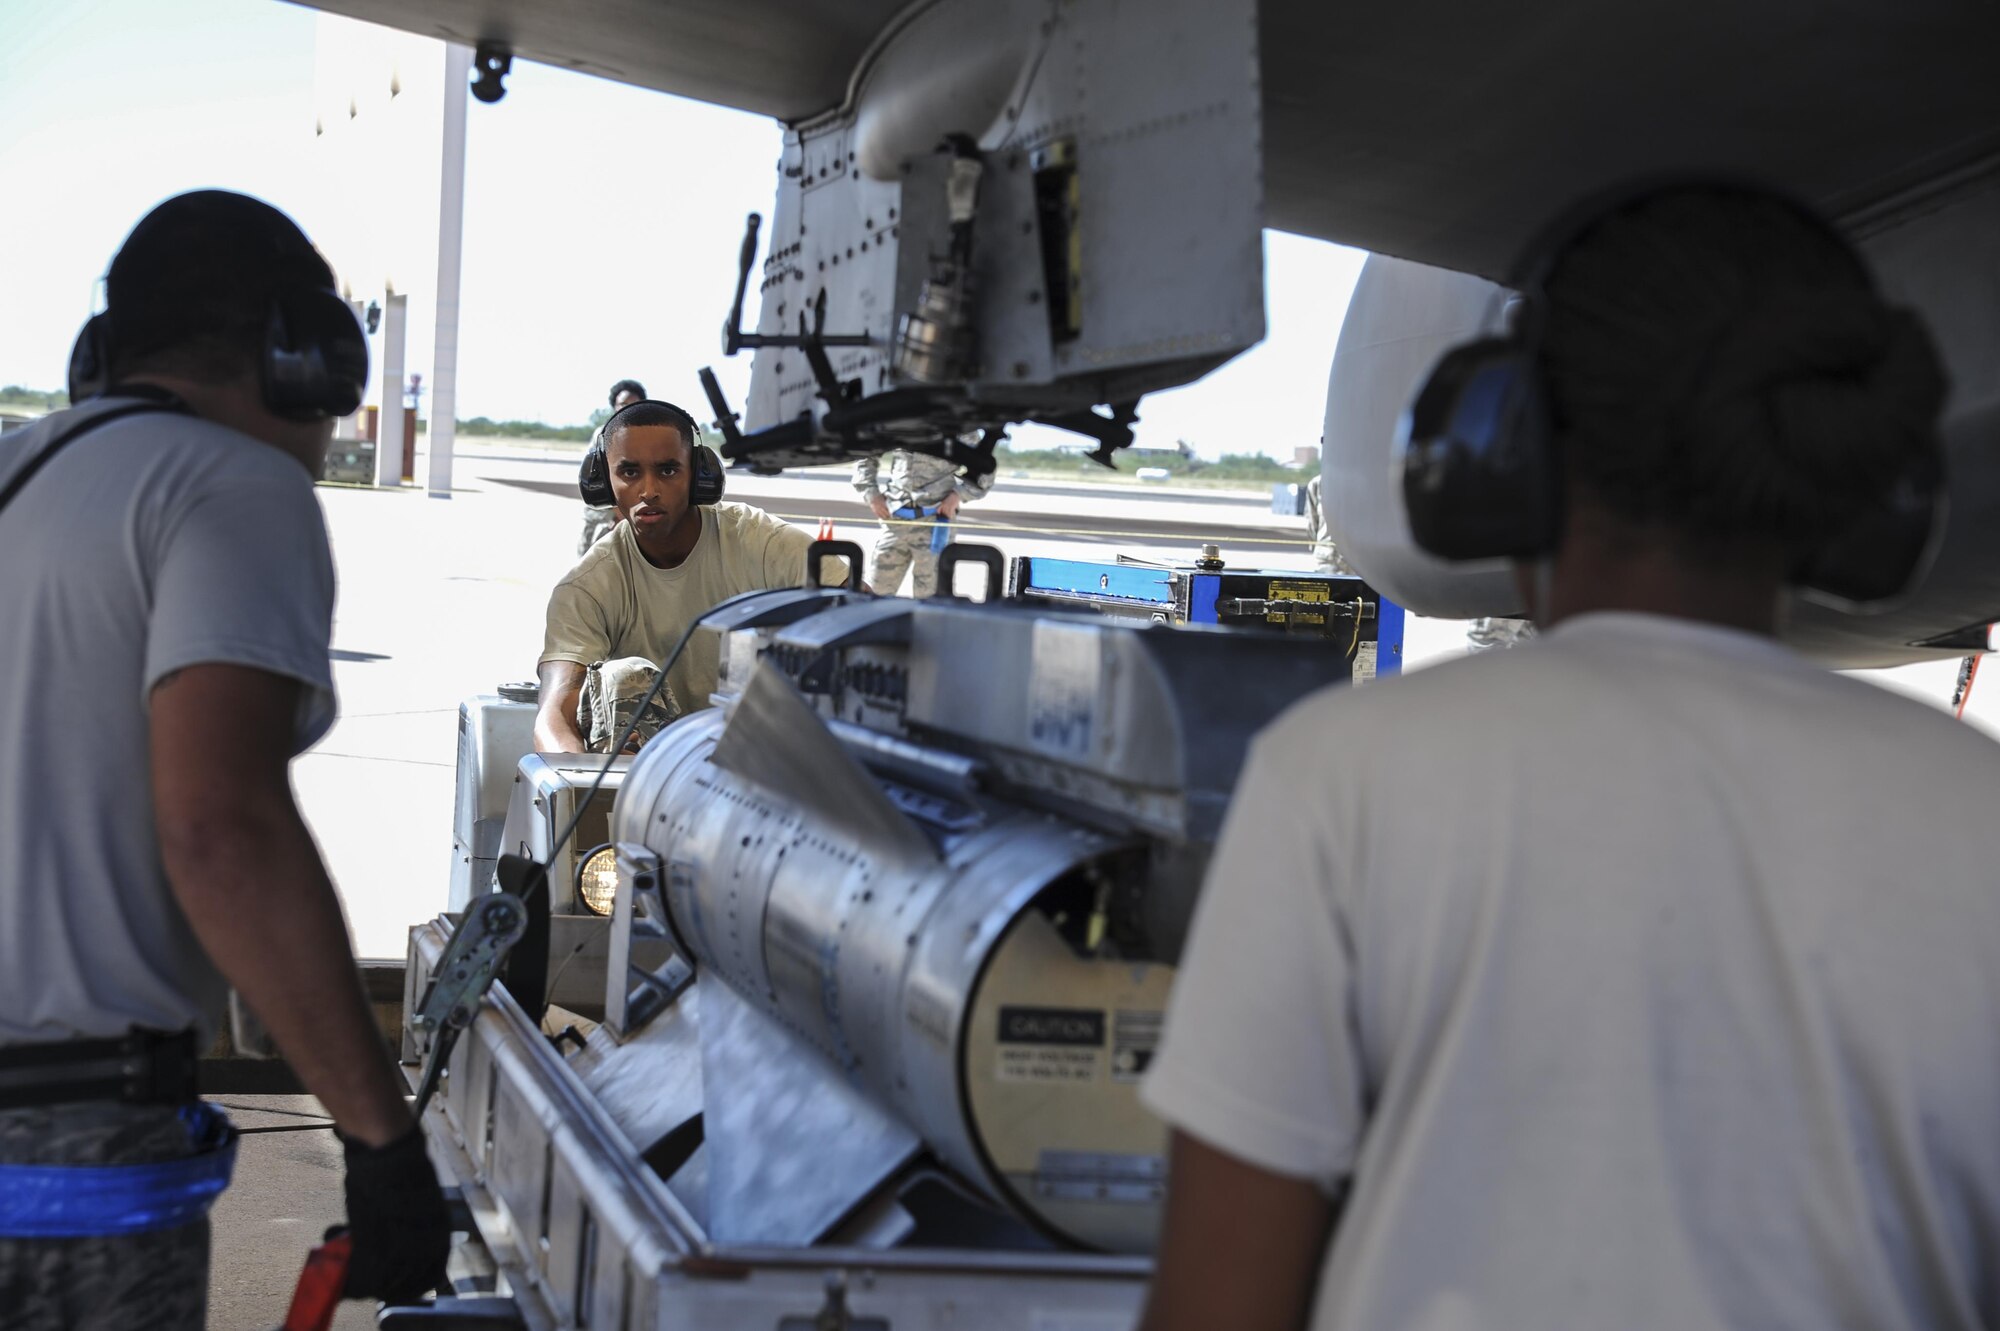 U.S. Air Force Senior Airman Jamal Williams, 354th Aircraft Maintenance Unit weapons crew member, utilizes a MHU-83 bomb loader to load an AGM-65 Maverick missile onto an A-10C Thunderbolt II during a load crew of the quarter competition at Davis-Monthan Air Force Base, Ariz., Oct. 7, 2016. The load crews were evaluated on timeliness and deficiencies during the contest. (U.S. Air Force photo by Airman 1st Class Mya M. Crosby)

